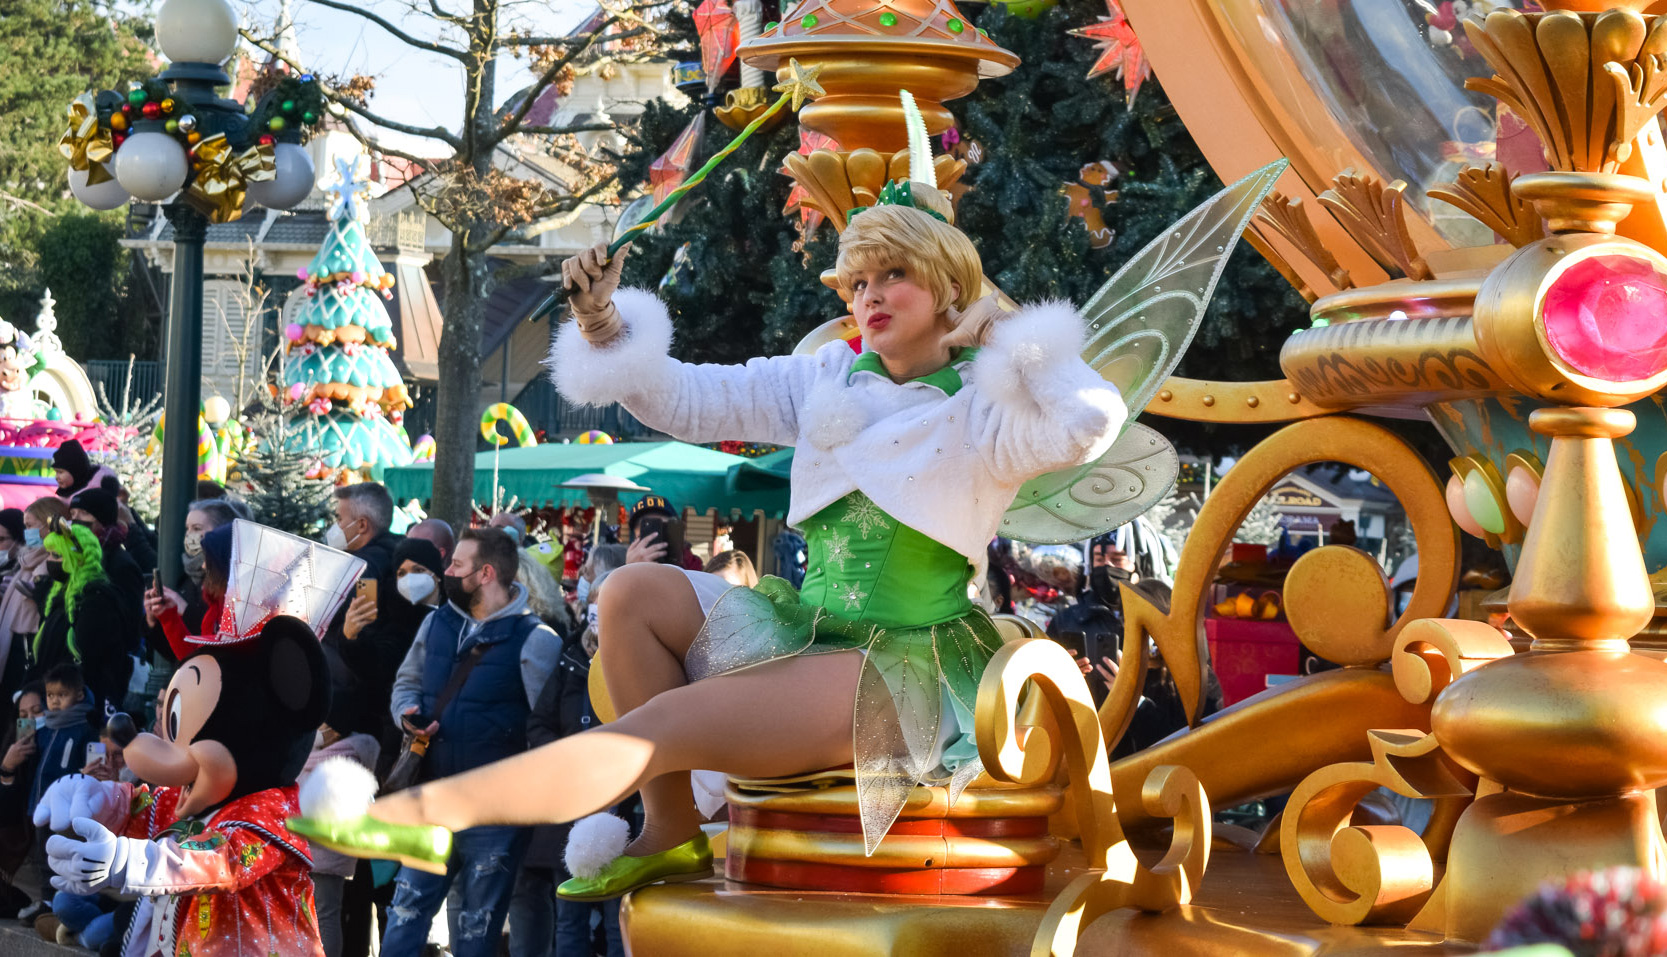 Tinker Bell will be the first Pop Up Surprise Character Meet & Greet at Disneyland Paris exclusively for Disneyland Pass & Annual Pass Holders!